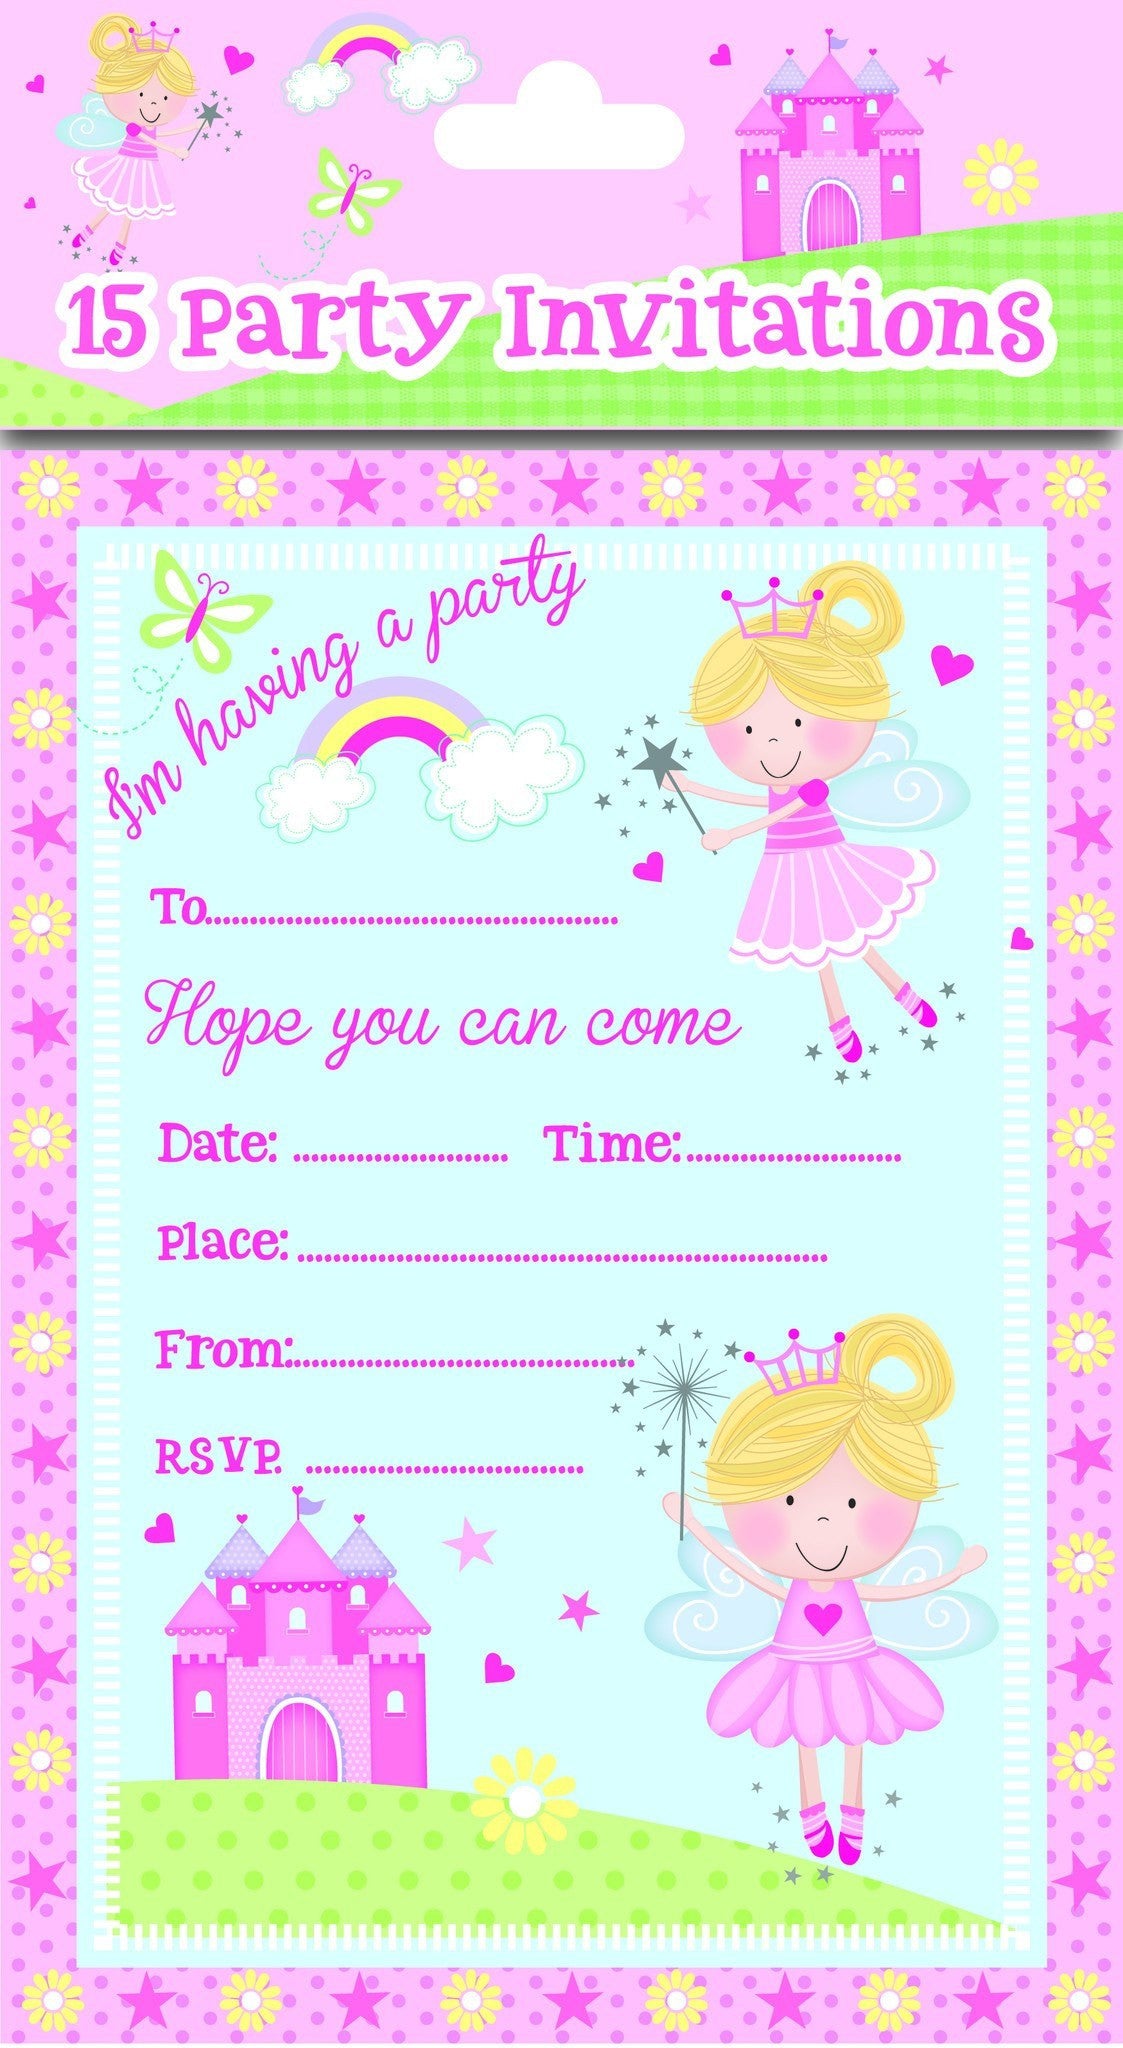 Partyware - 8 Pack Pink Fairy Party Invitations - Partyware - 8PK